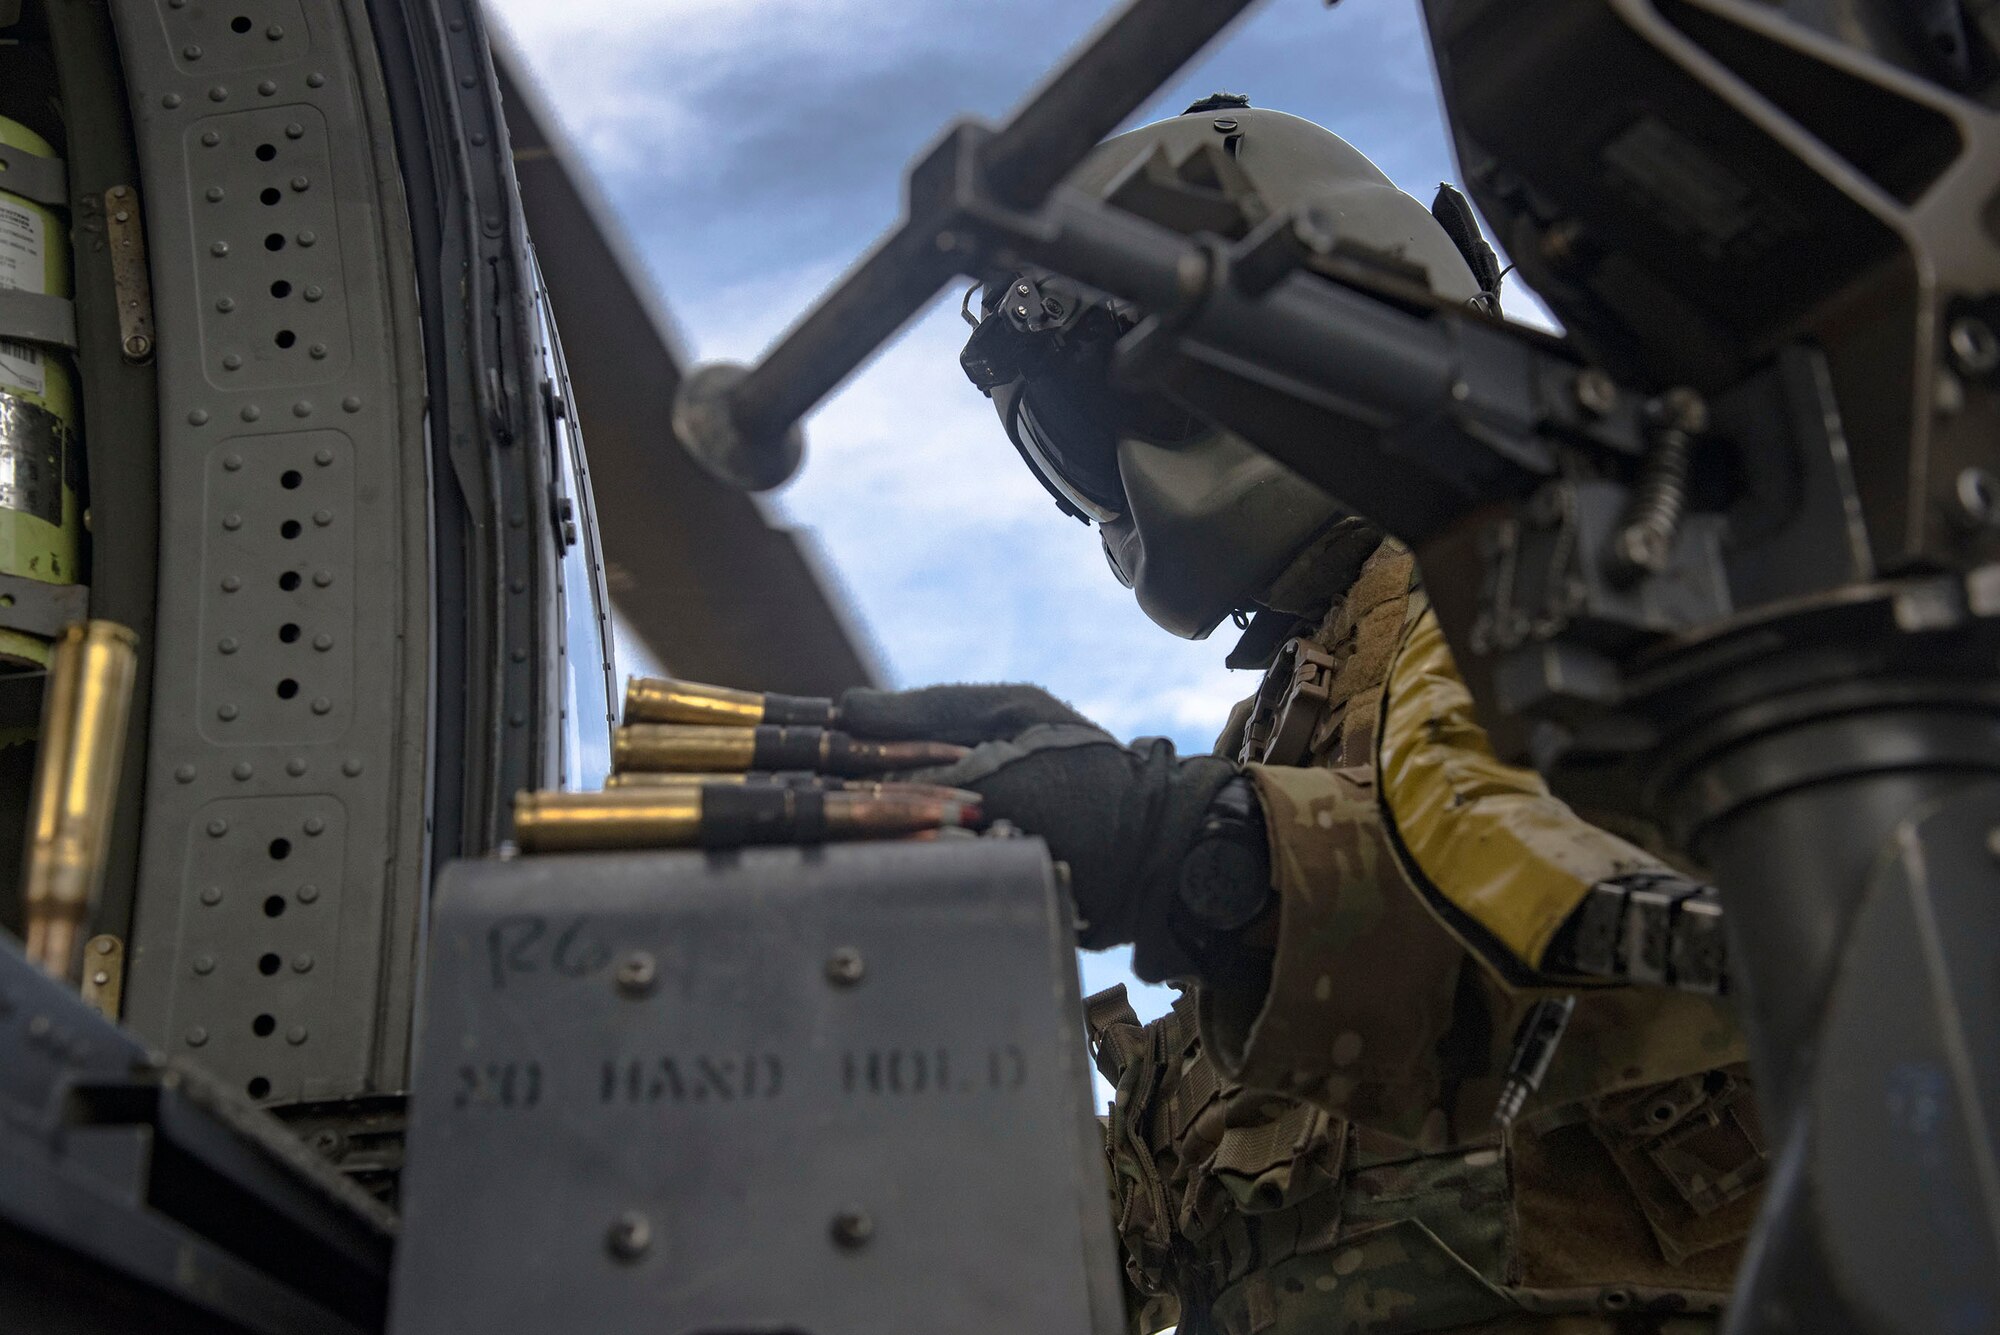 A 41st Rescue Squadron special missions aviator loads ammunition into an M2 machine gun mount on an HH-60G Pave Hawk during pre-deployment ‘spin-up’ training, Dec. 12, 2018, at Avon Park Air Force Range, Fla. During this pre-deployment ‘spin-up’ training, Moody’s 347th Rescue Group tested and maximized their combat search and rescue (CSAR) and personnel recovery capabilities. Under normal circumstances, the HH-60G Pave Hawk helicopter crews and maintainers deploy from Moody and integrate with Guardian Angel teams from different bases. This time, Moody’s 38th RQS and 41st RQS’s will deploy together and utilized this exercise to improve their mission readiness and cohesion before their departure. (U.S. Air Force photo by Senior Airman Greg Nash)